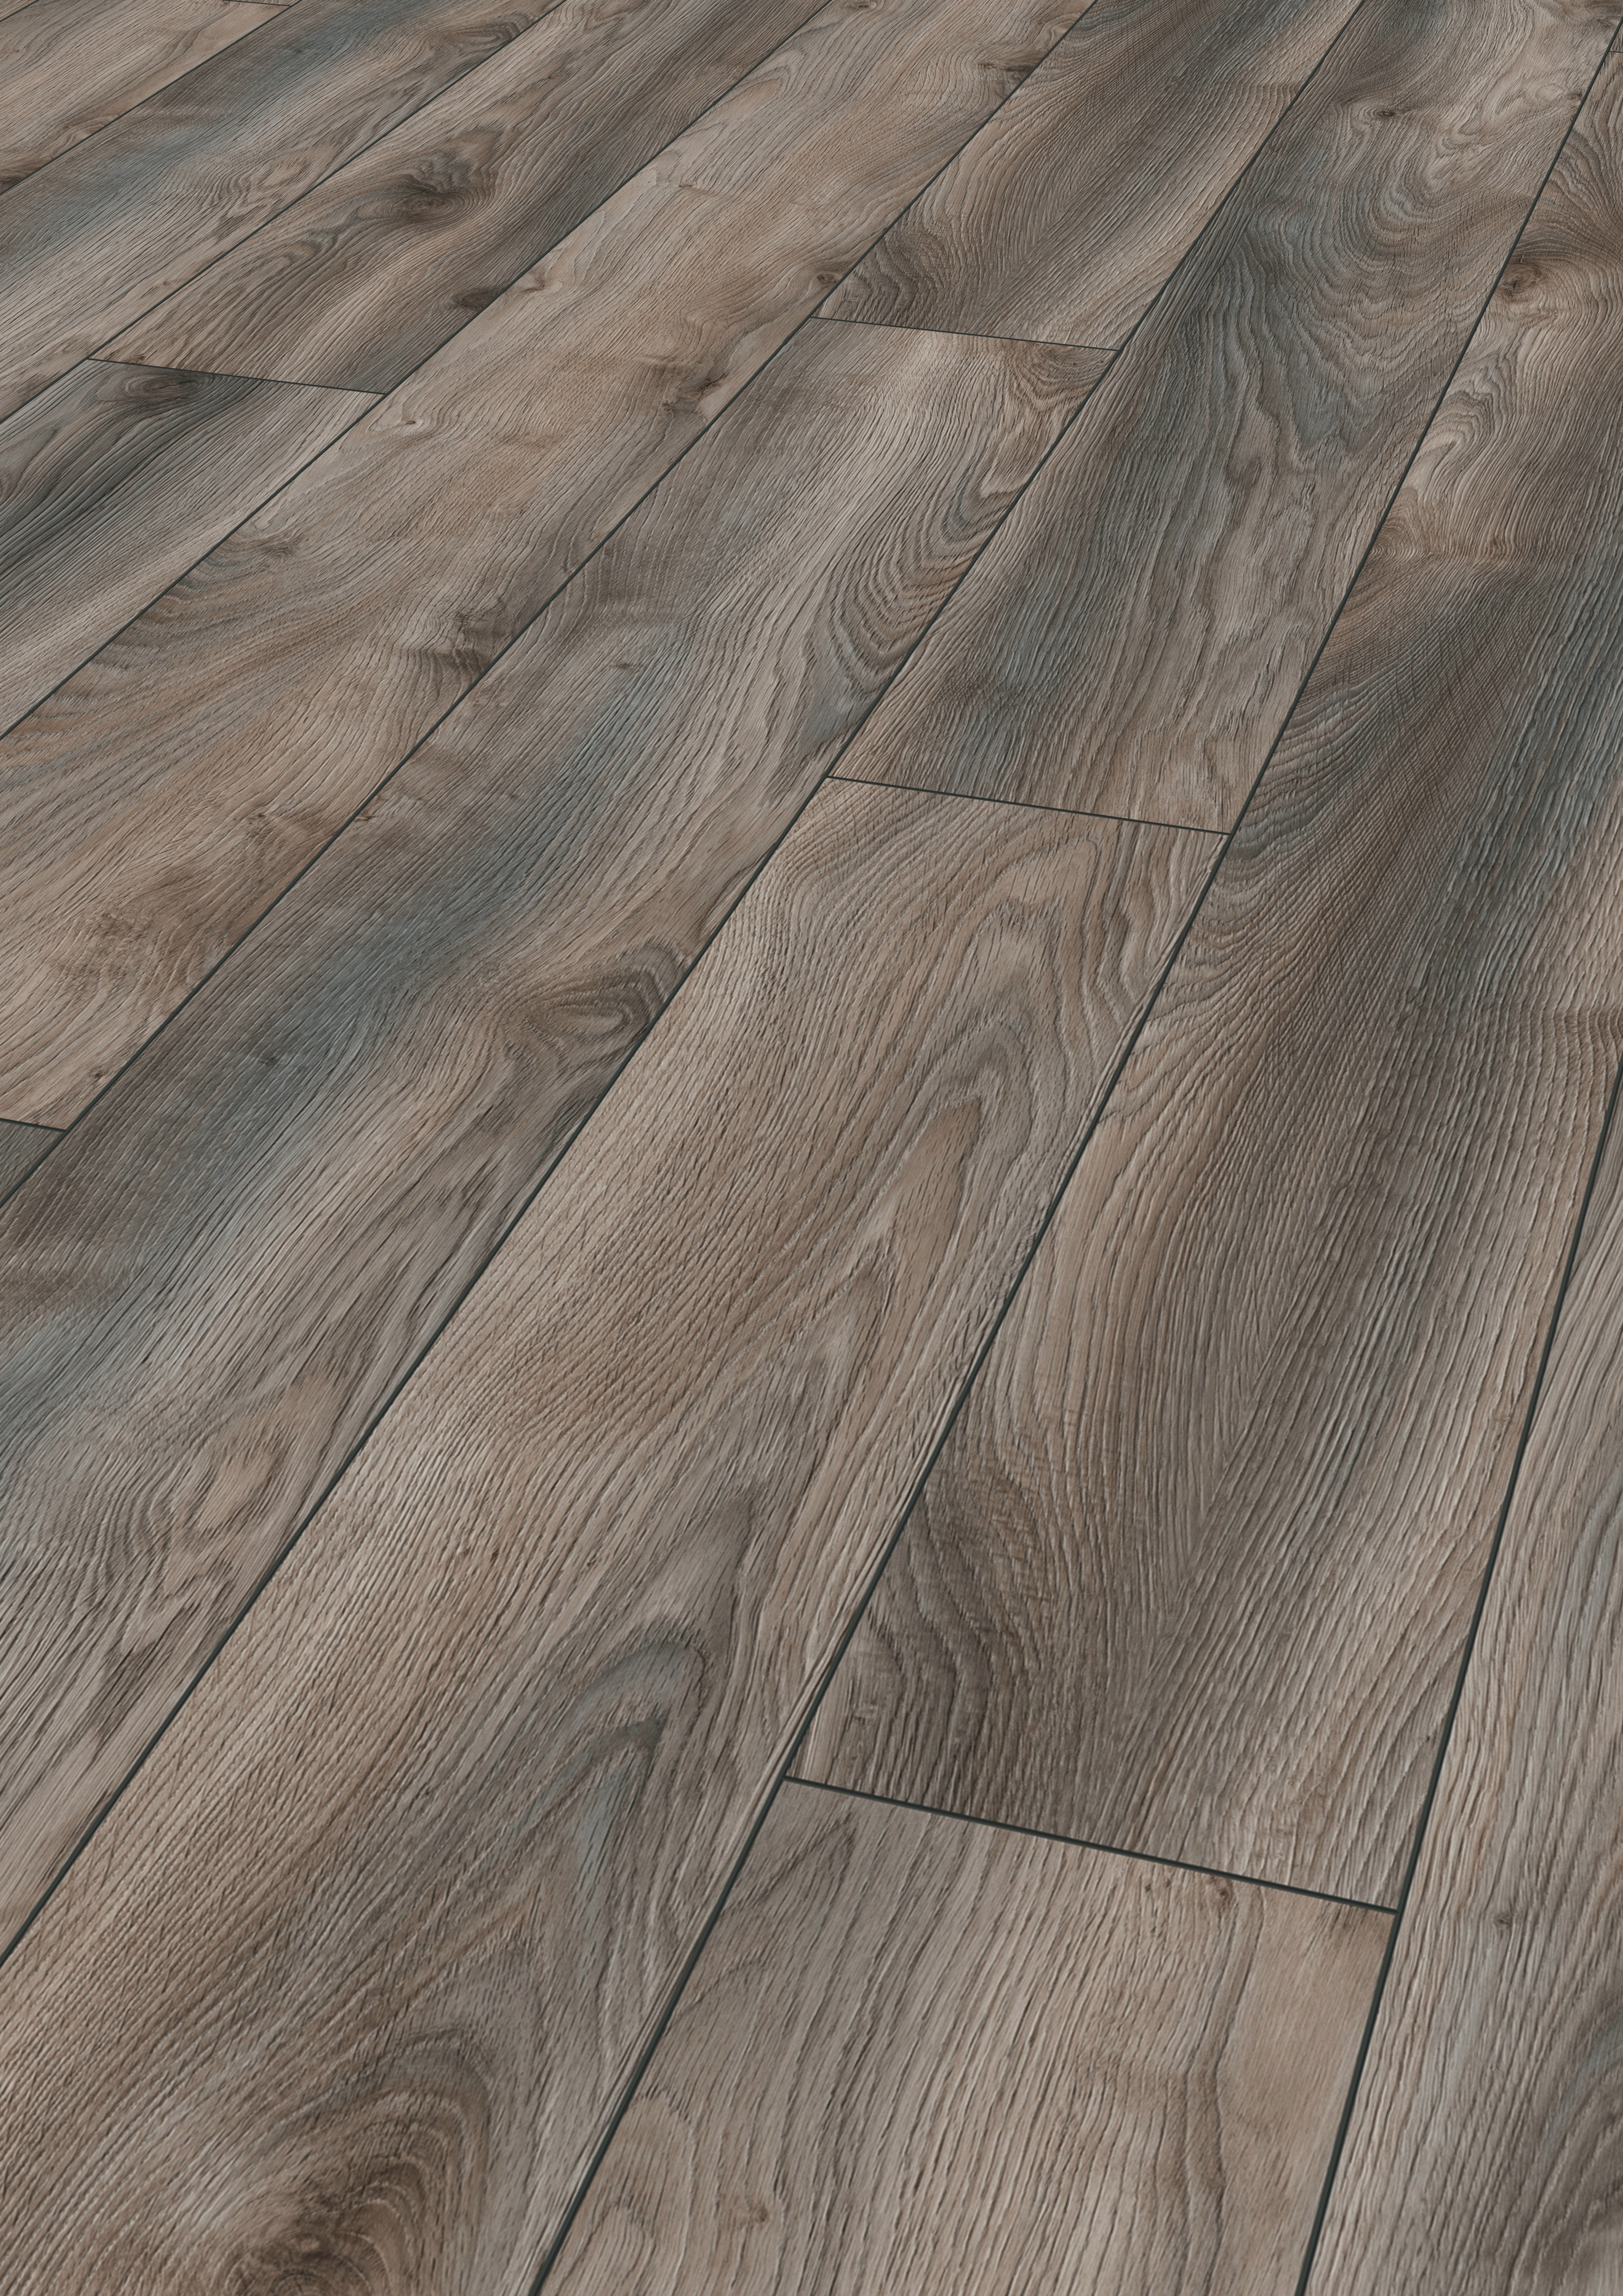 11 Lovable Hardwood Flooring Mississauga Ontario 2024 free download hardwood flooring mississauga ontario of mammut laminate flooring in country house plank style kronotex within download picture amp